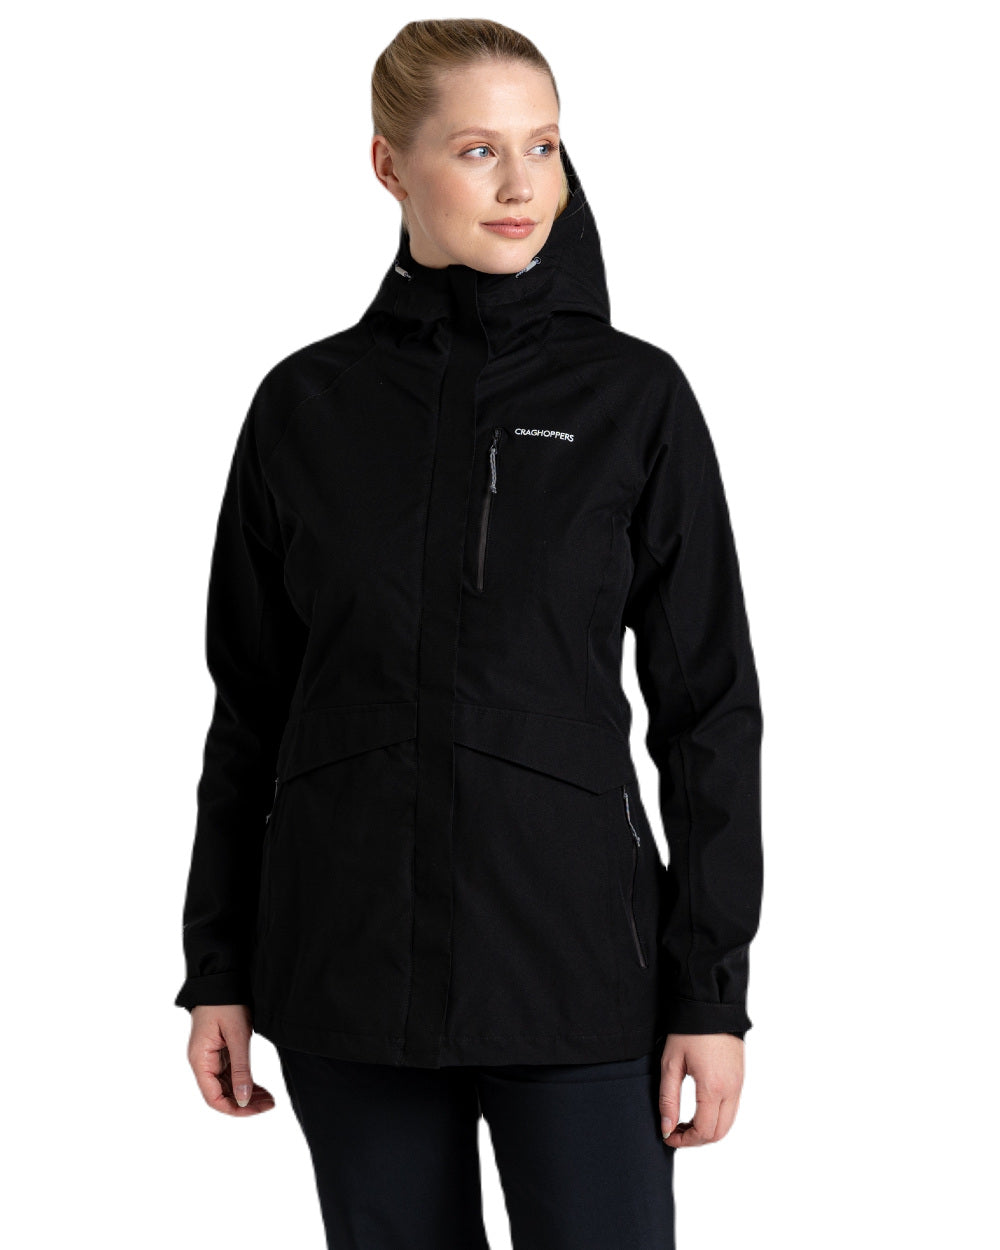 Black Coloured Craghoppers Caldbeck Ladies Jacket On A White Background 